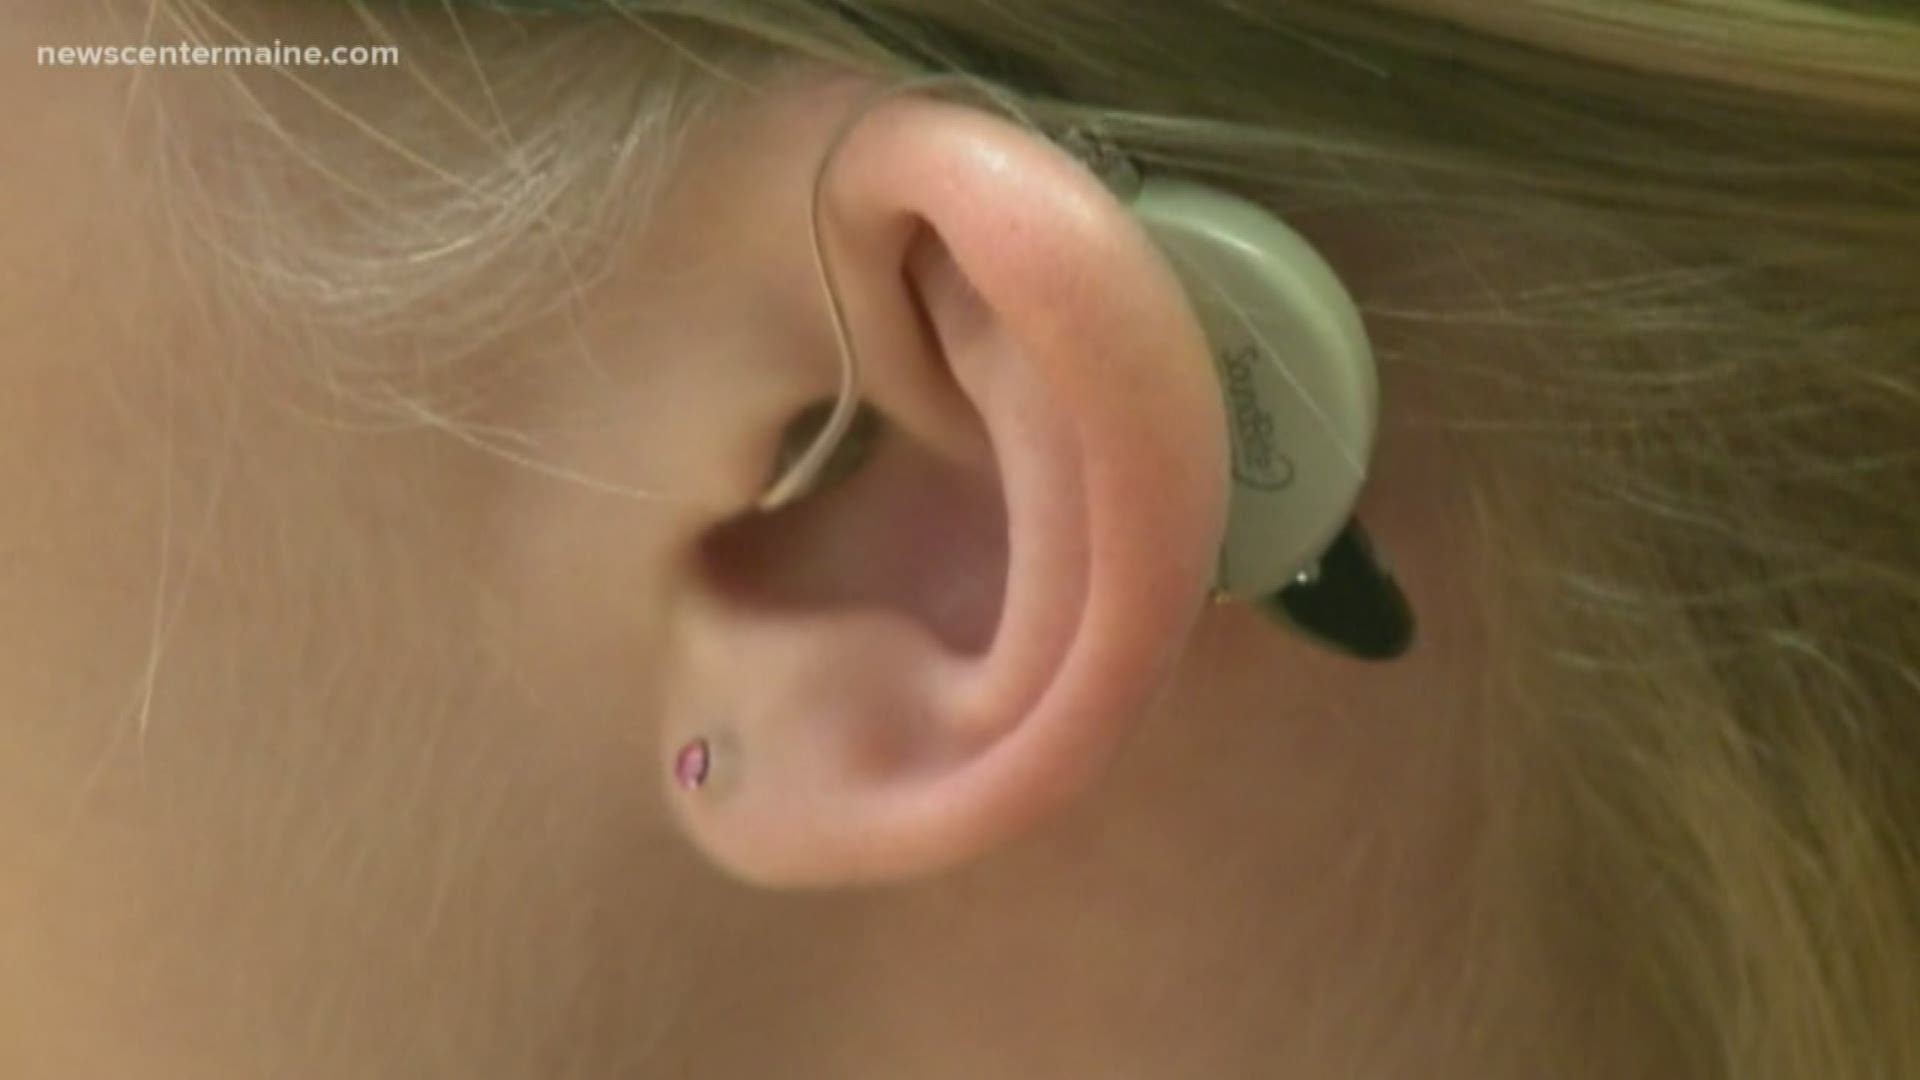 Maine is now the 5th state to require private health insureres, as well as Medicaid, to cover hearing aid benefits.